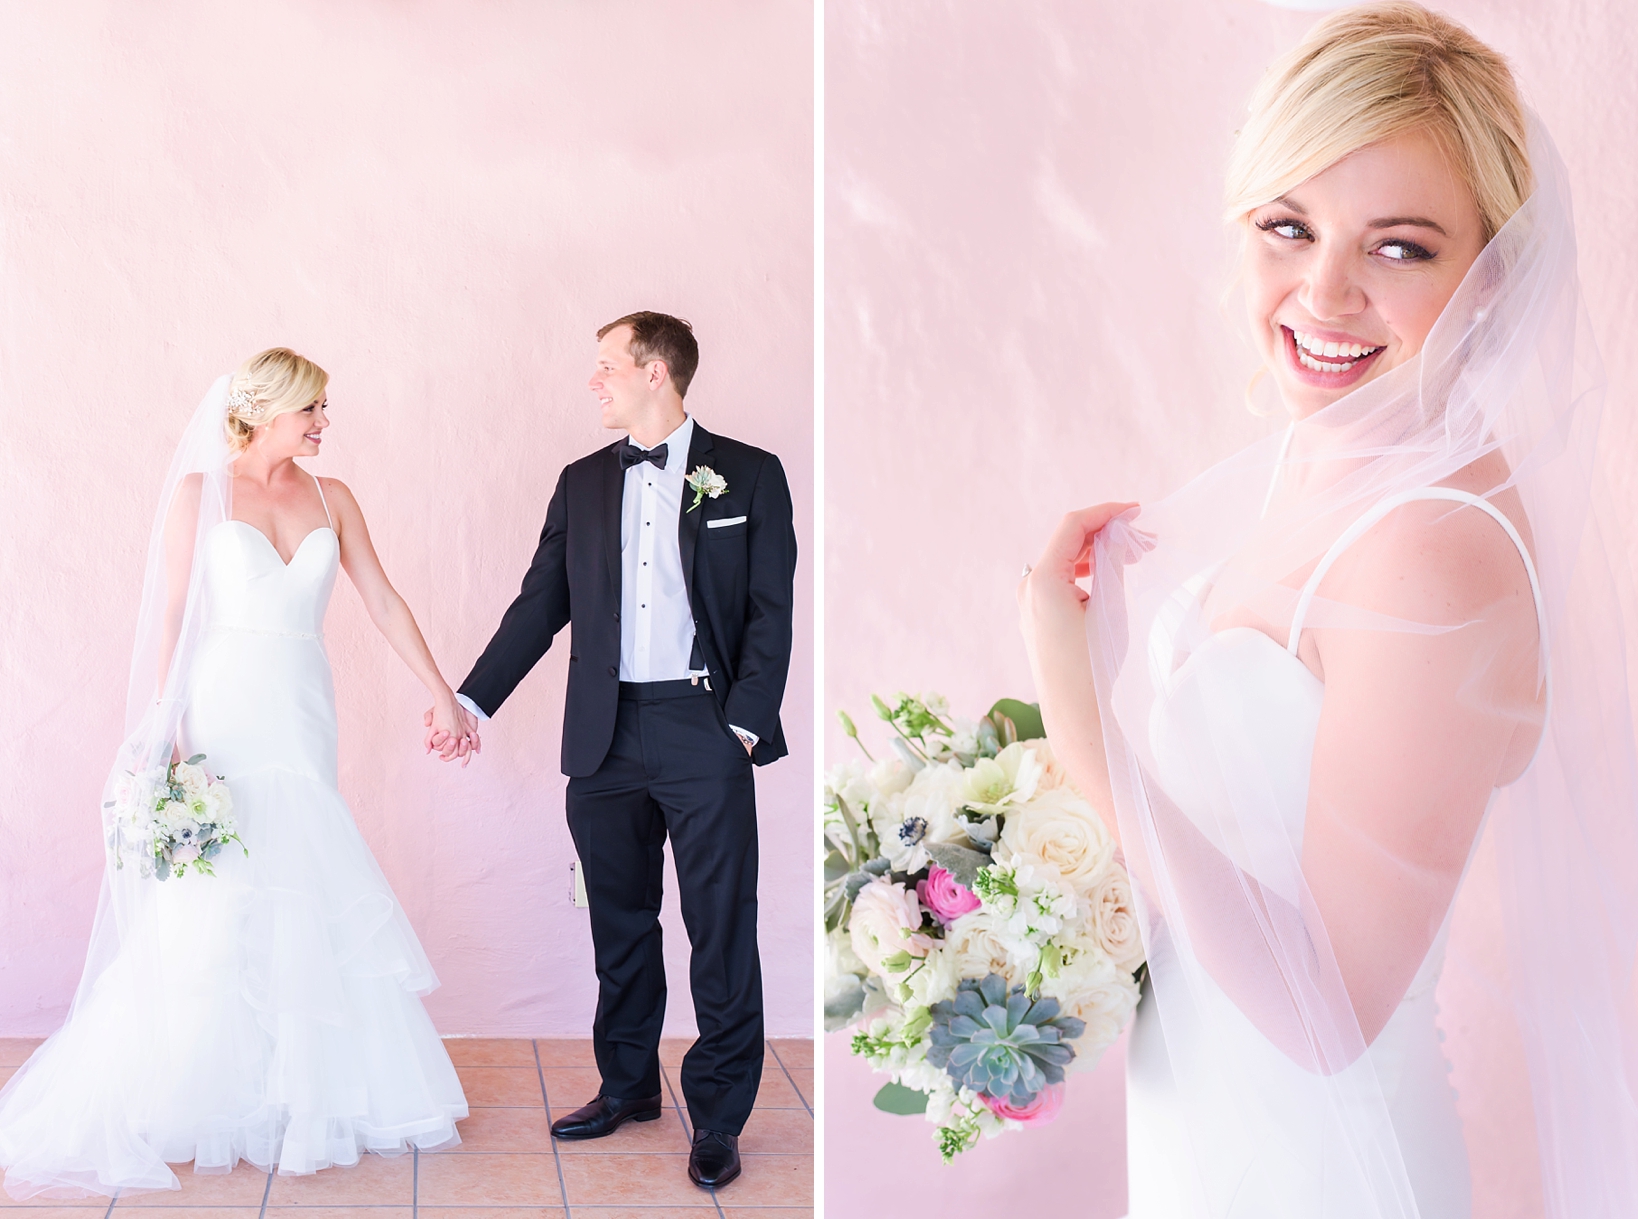 Bride and groom portrait against the pink walls of the Vinoy in St. Petersburg, FL by Sarah & Ben Photography